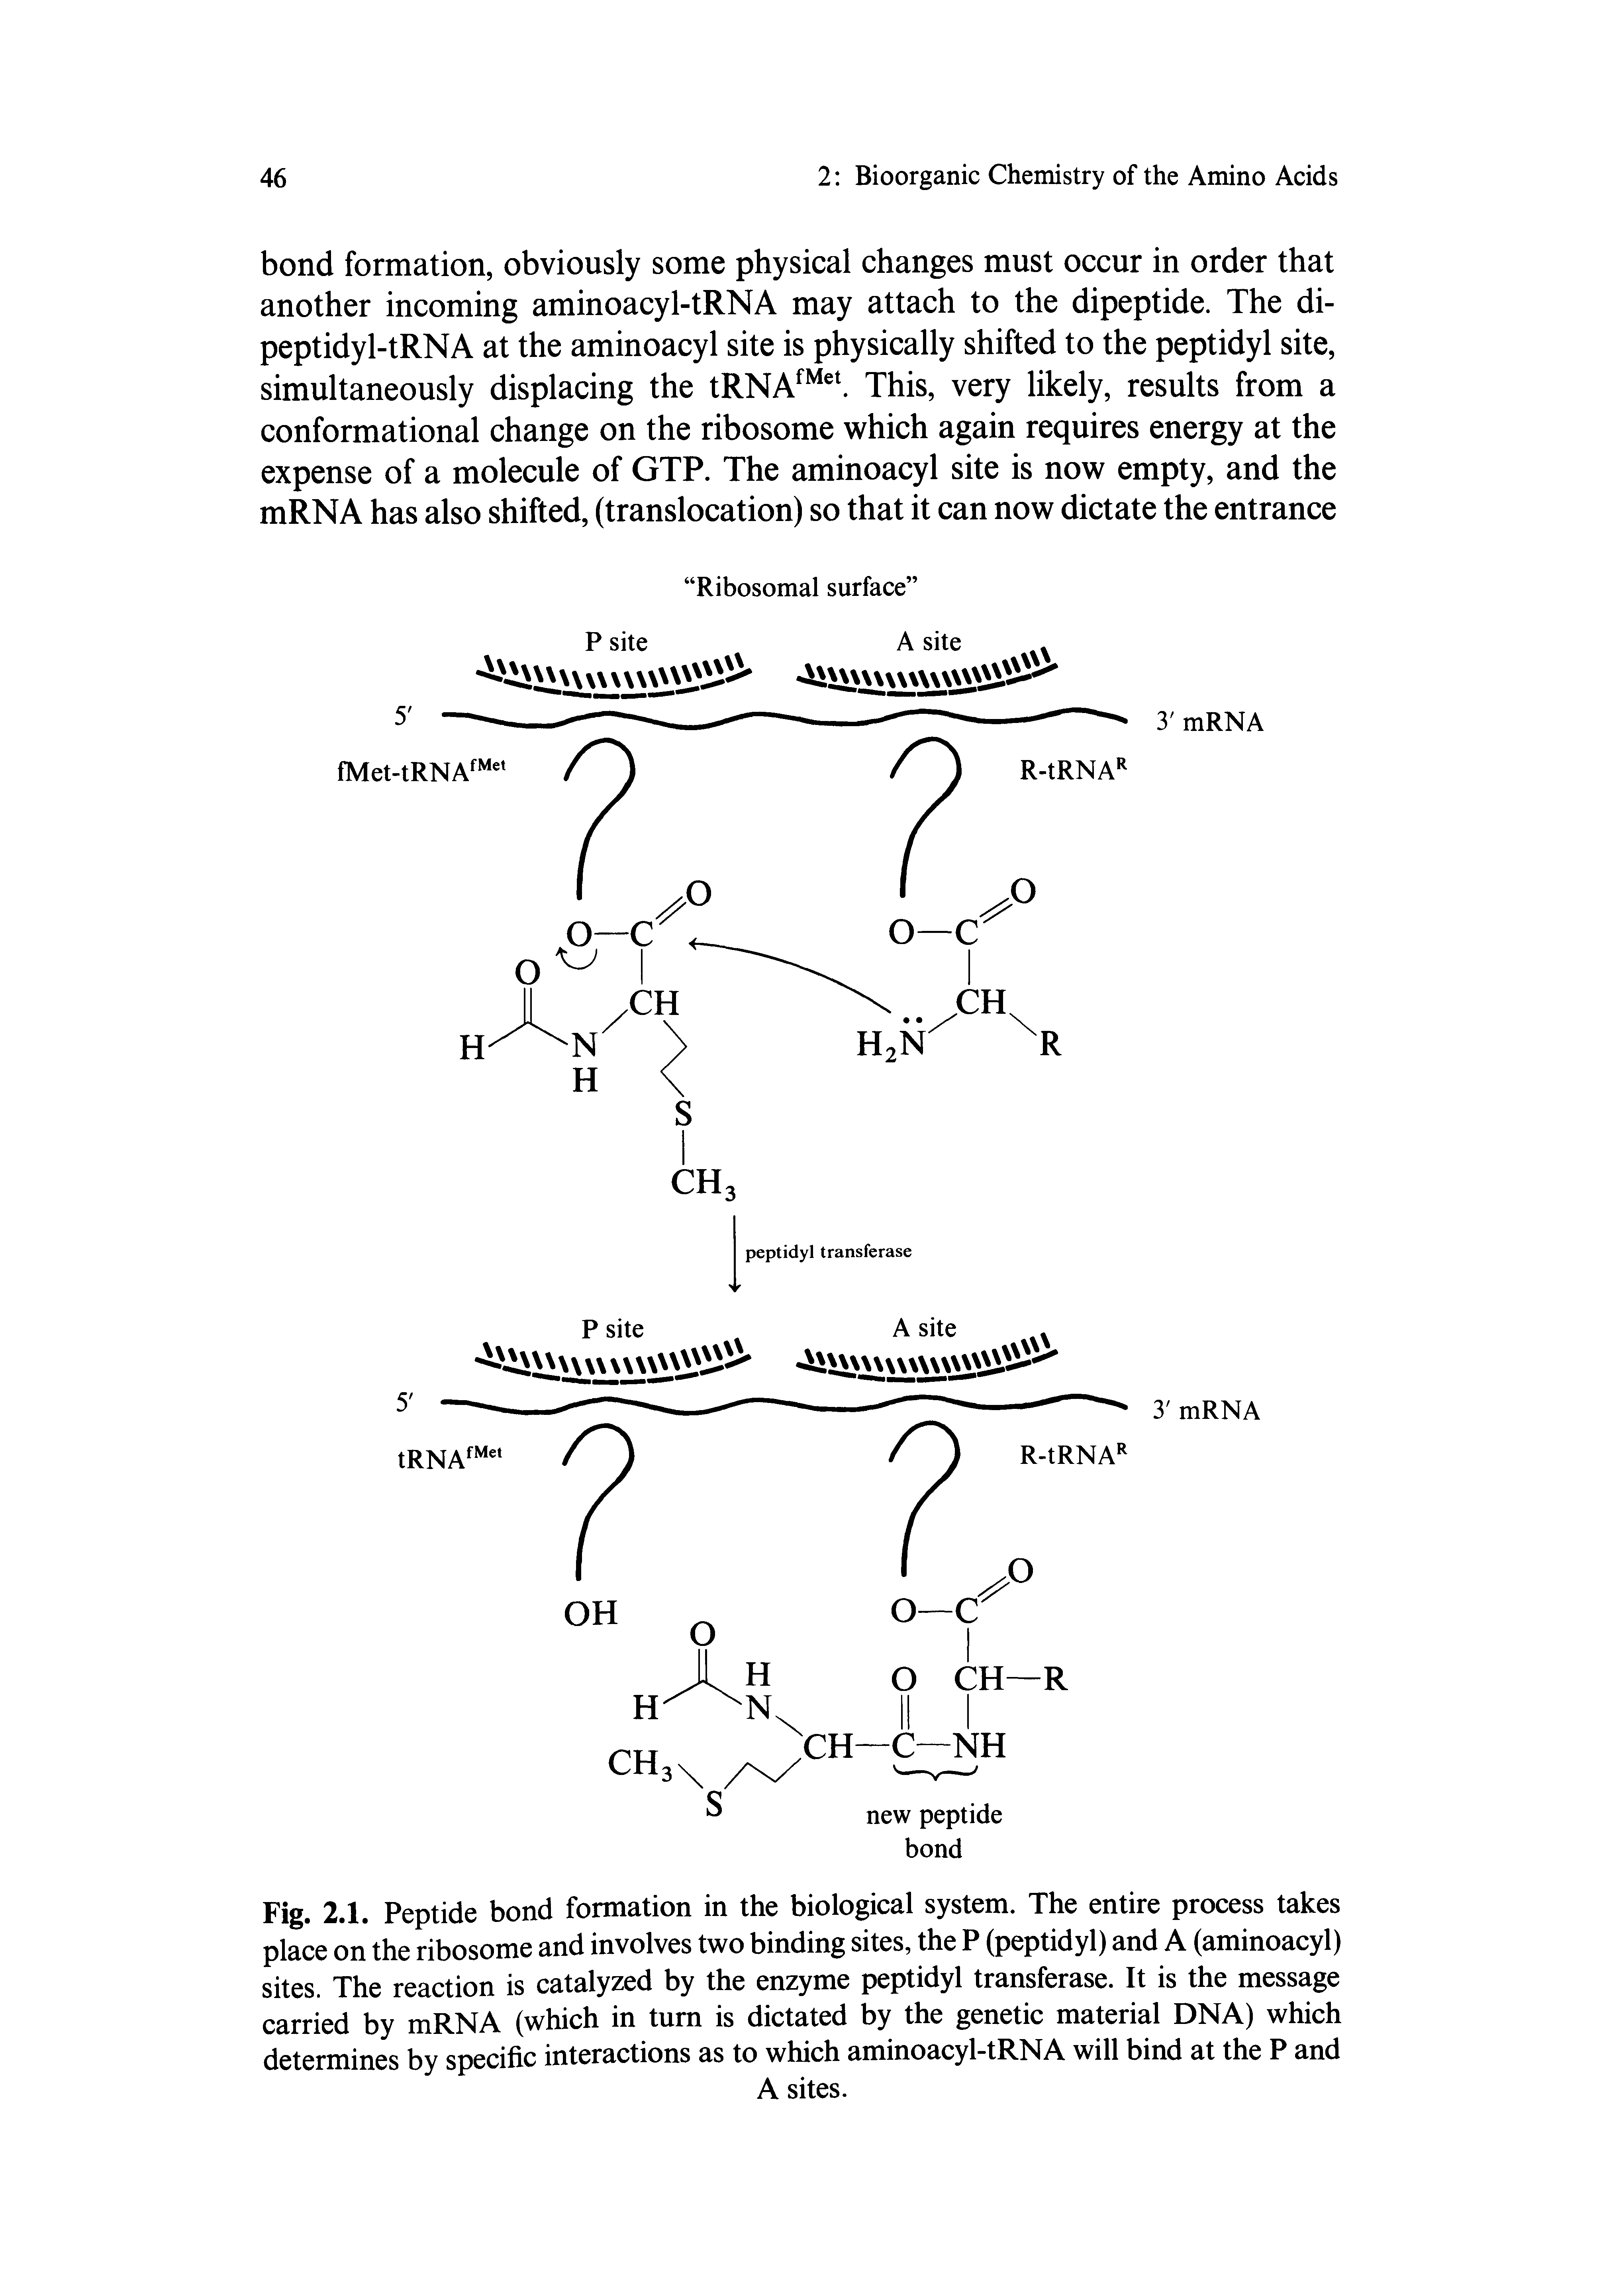 Fig. 2.1. Peptide bond formation in the biological system. The entire process takes place on the ribosome and involves two binding sites, the P (peptidyl) and A (aminoacyl) sites. The reaction is catalyzed by the enzyme peptidyl transferase. It is the message carried by mRNA (which in turn is dictated by the genetic material DNA) which determines by specific interactions as to which aminoacyl-tRNA will bind at the P and...